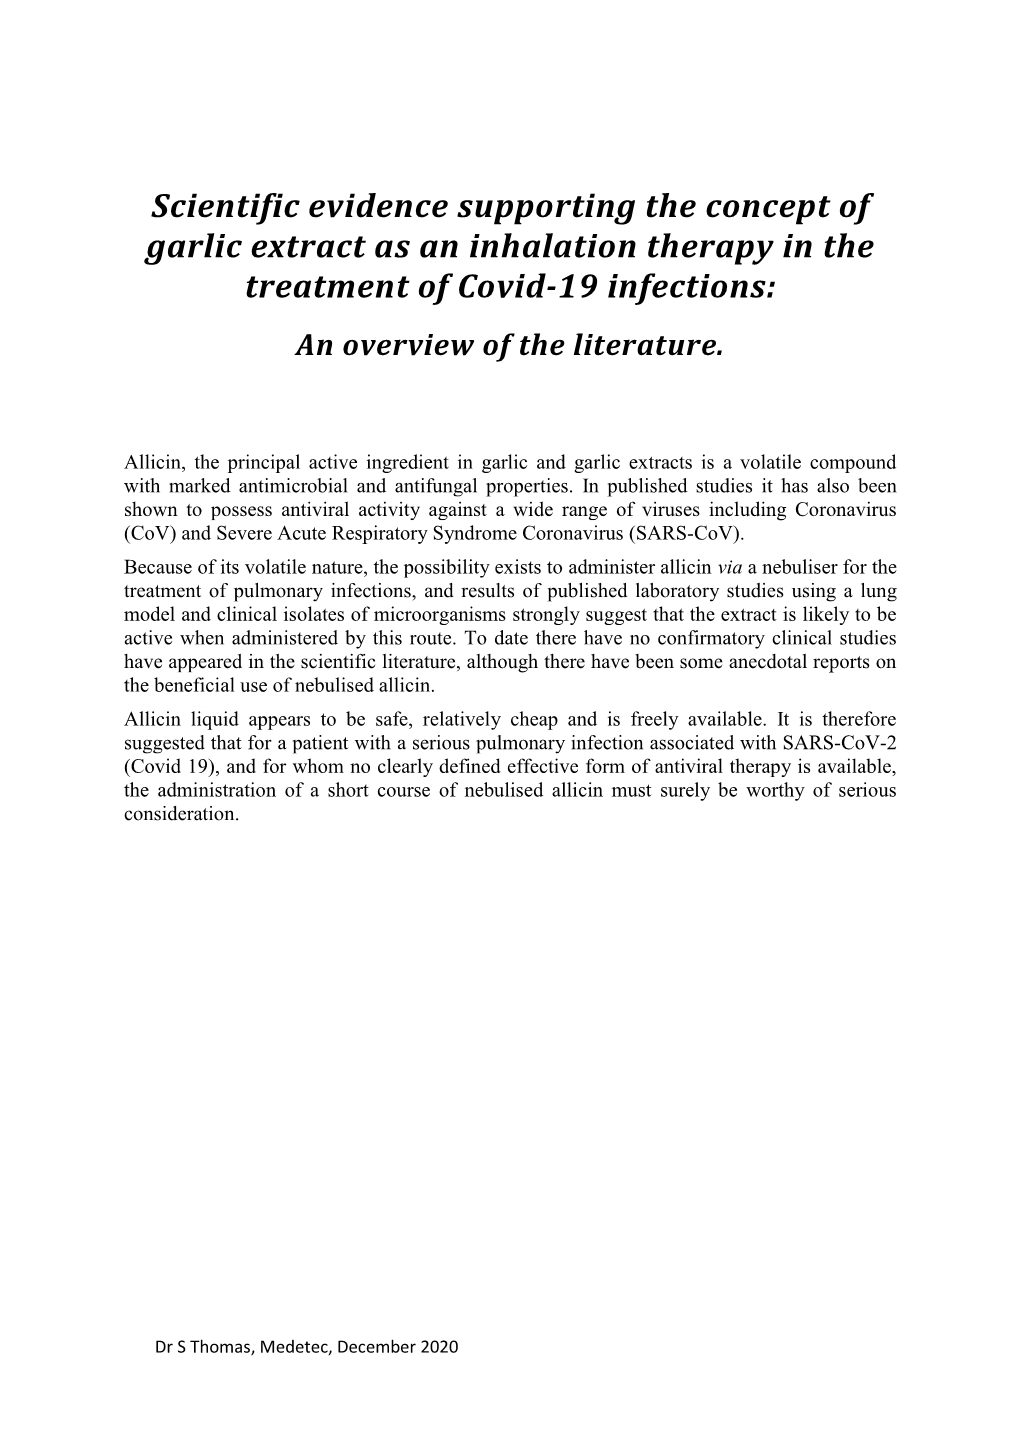 Scientific Evidence Supporting the Concept of Garlic Extract As an Inhalation Therapy in the Treatment of Covid-19 Infections: an Overview of the Literature